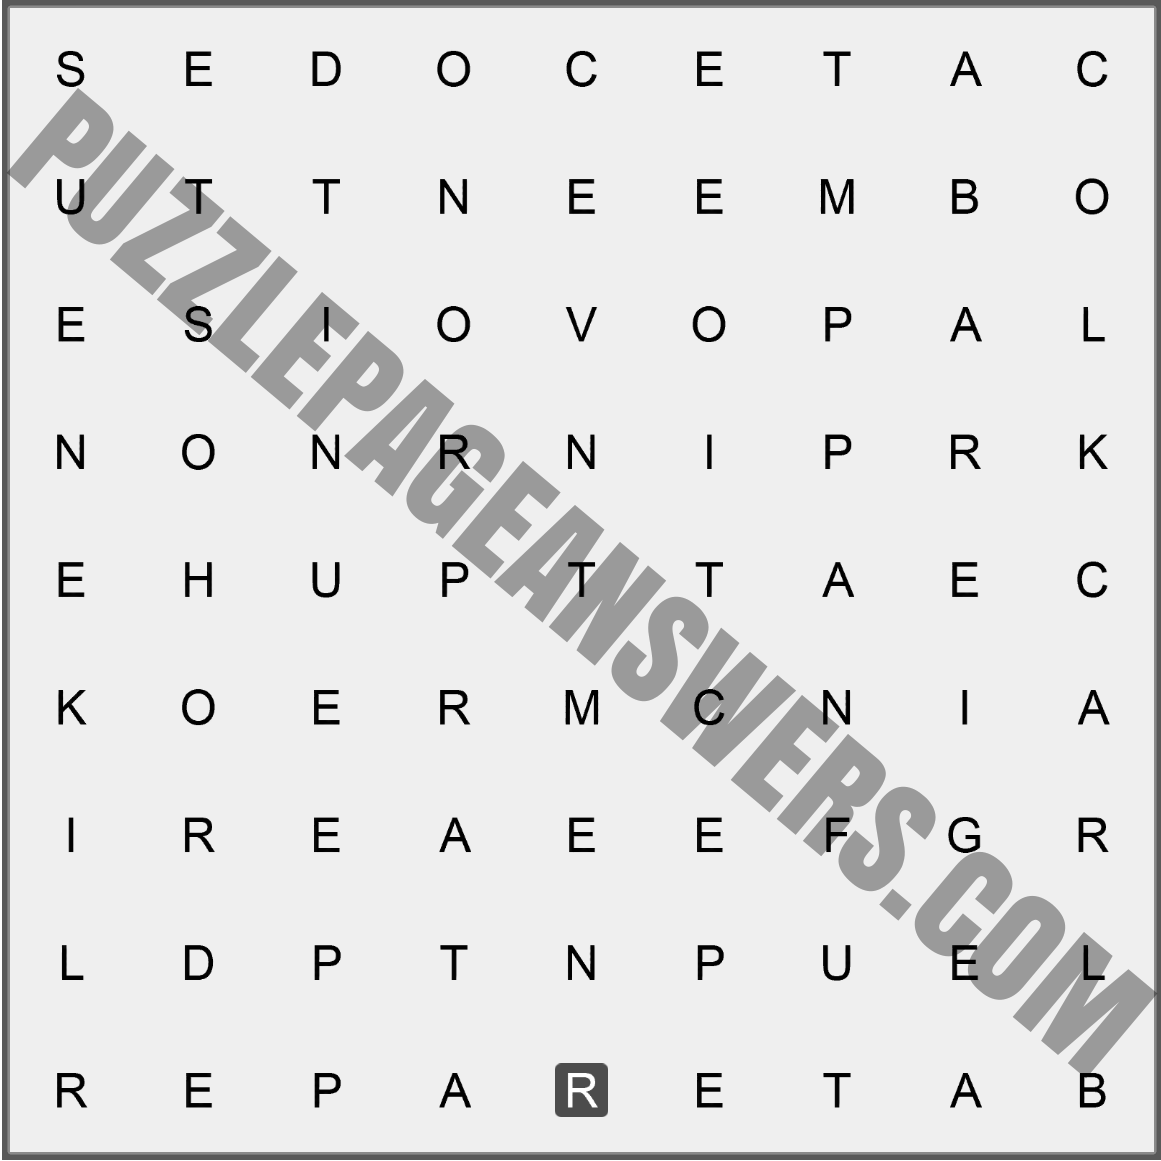 Puzzle Page Words Snake January 6 2021 PuzzlePageAnswers com